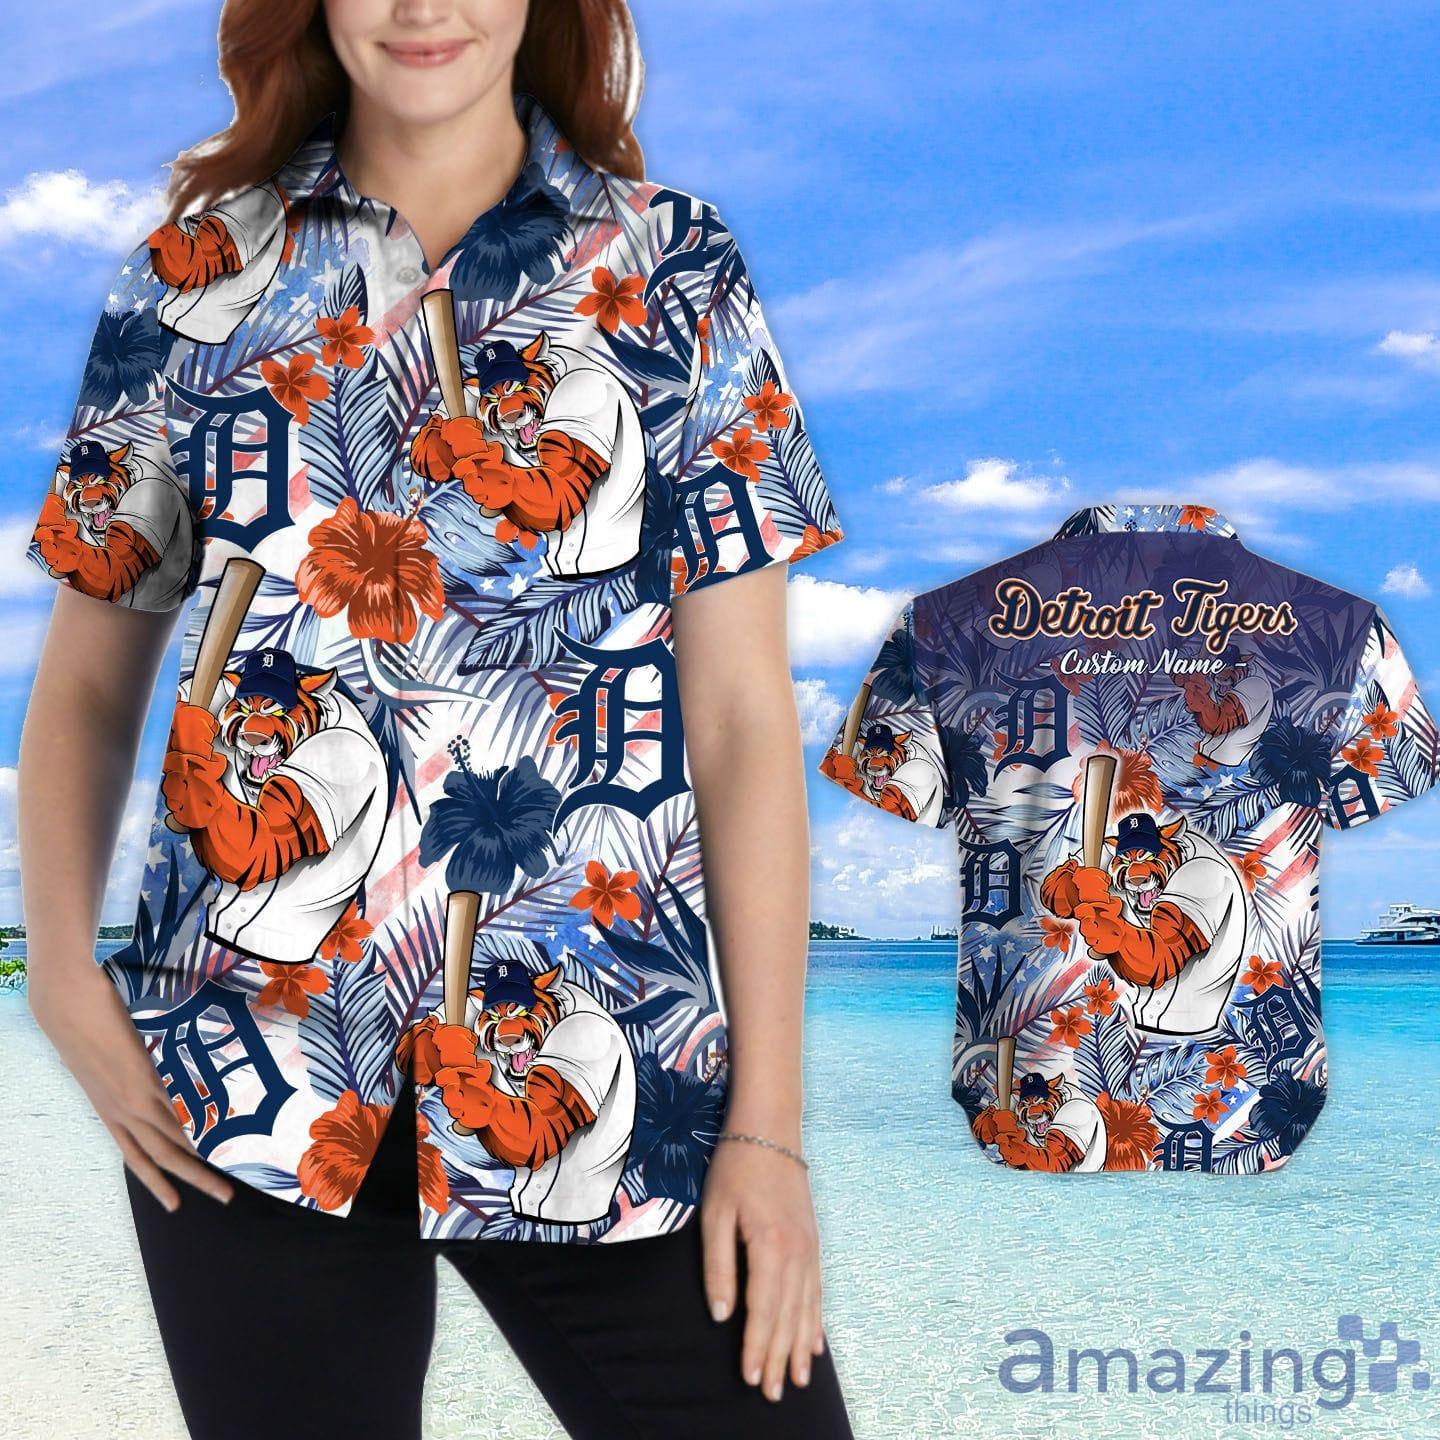 Women's Detroit Tigers Gear, Womens Tigers Apparel, Ladies Tigers Outfits